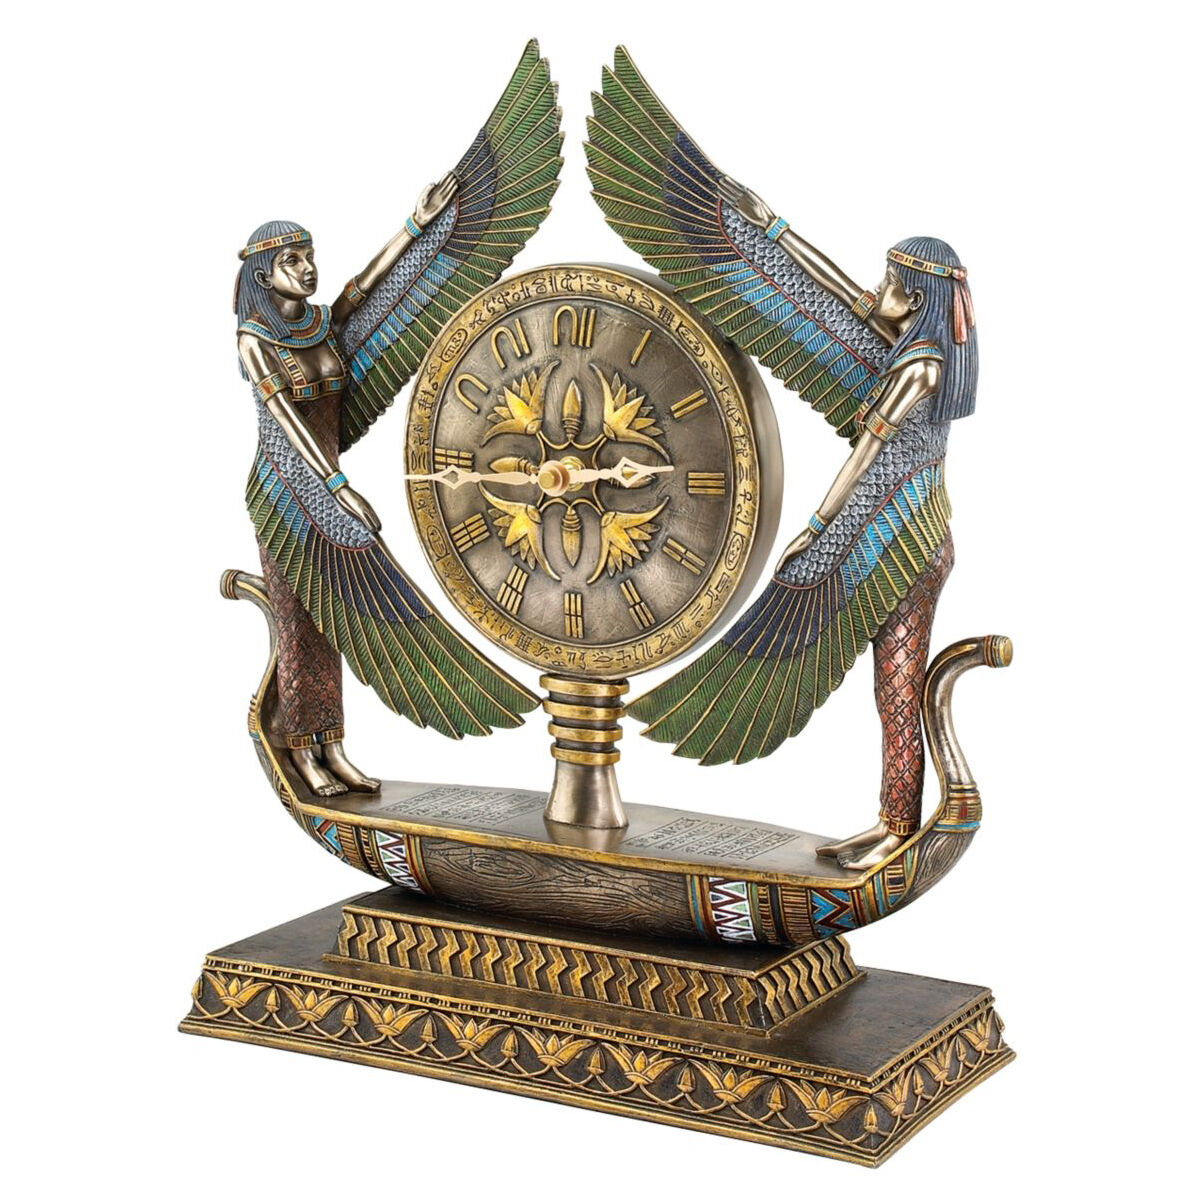 Hieroglyphic Numeral Double Winged Isis Goddess Egyptian Barge Desk Mantle Clock